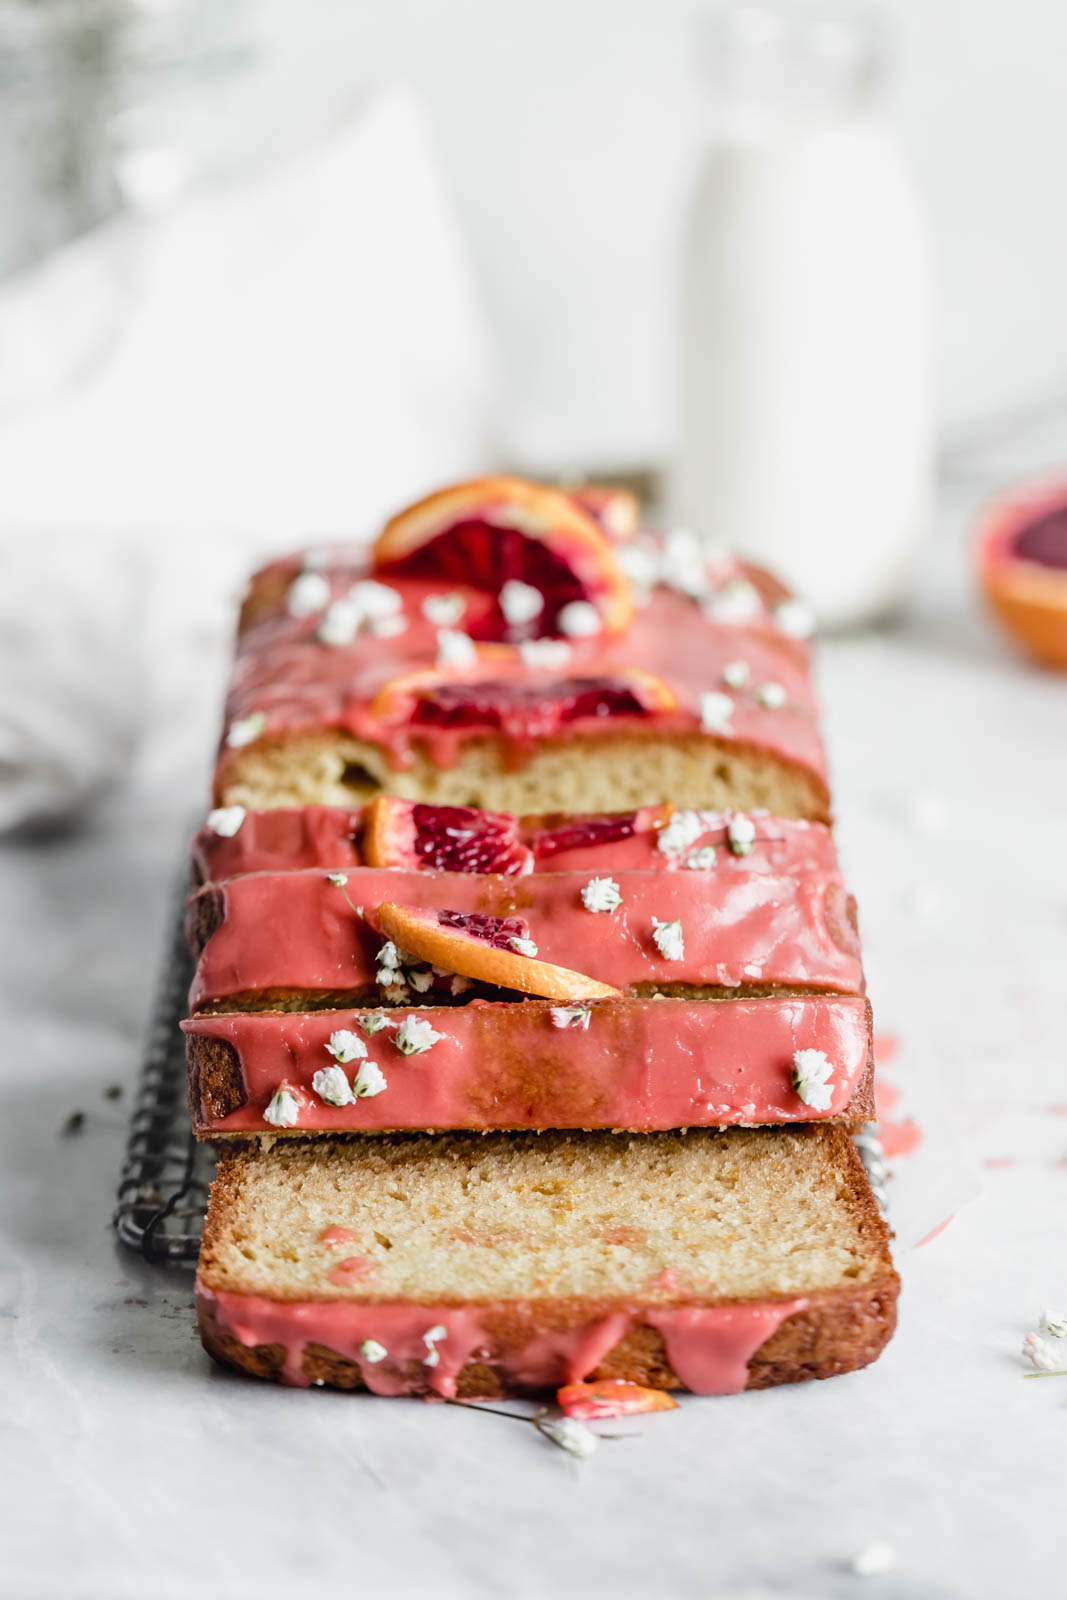 Celebrate citrus season with this beautiful blood orange loaf cake made with greek yogurt and topped with the perfect tangy pink glaze.